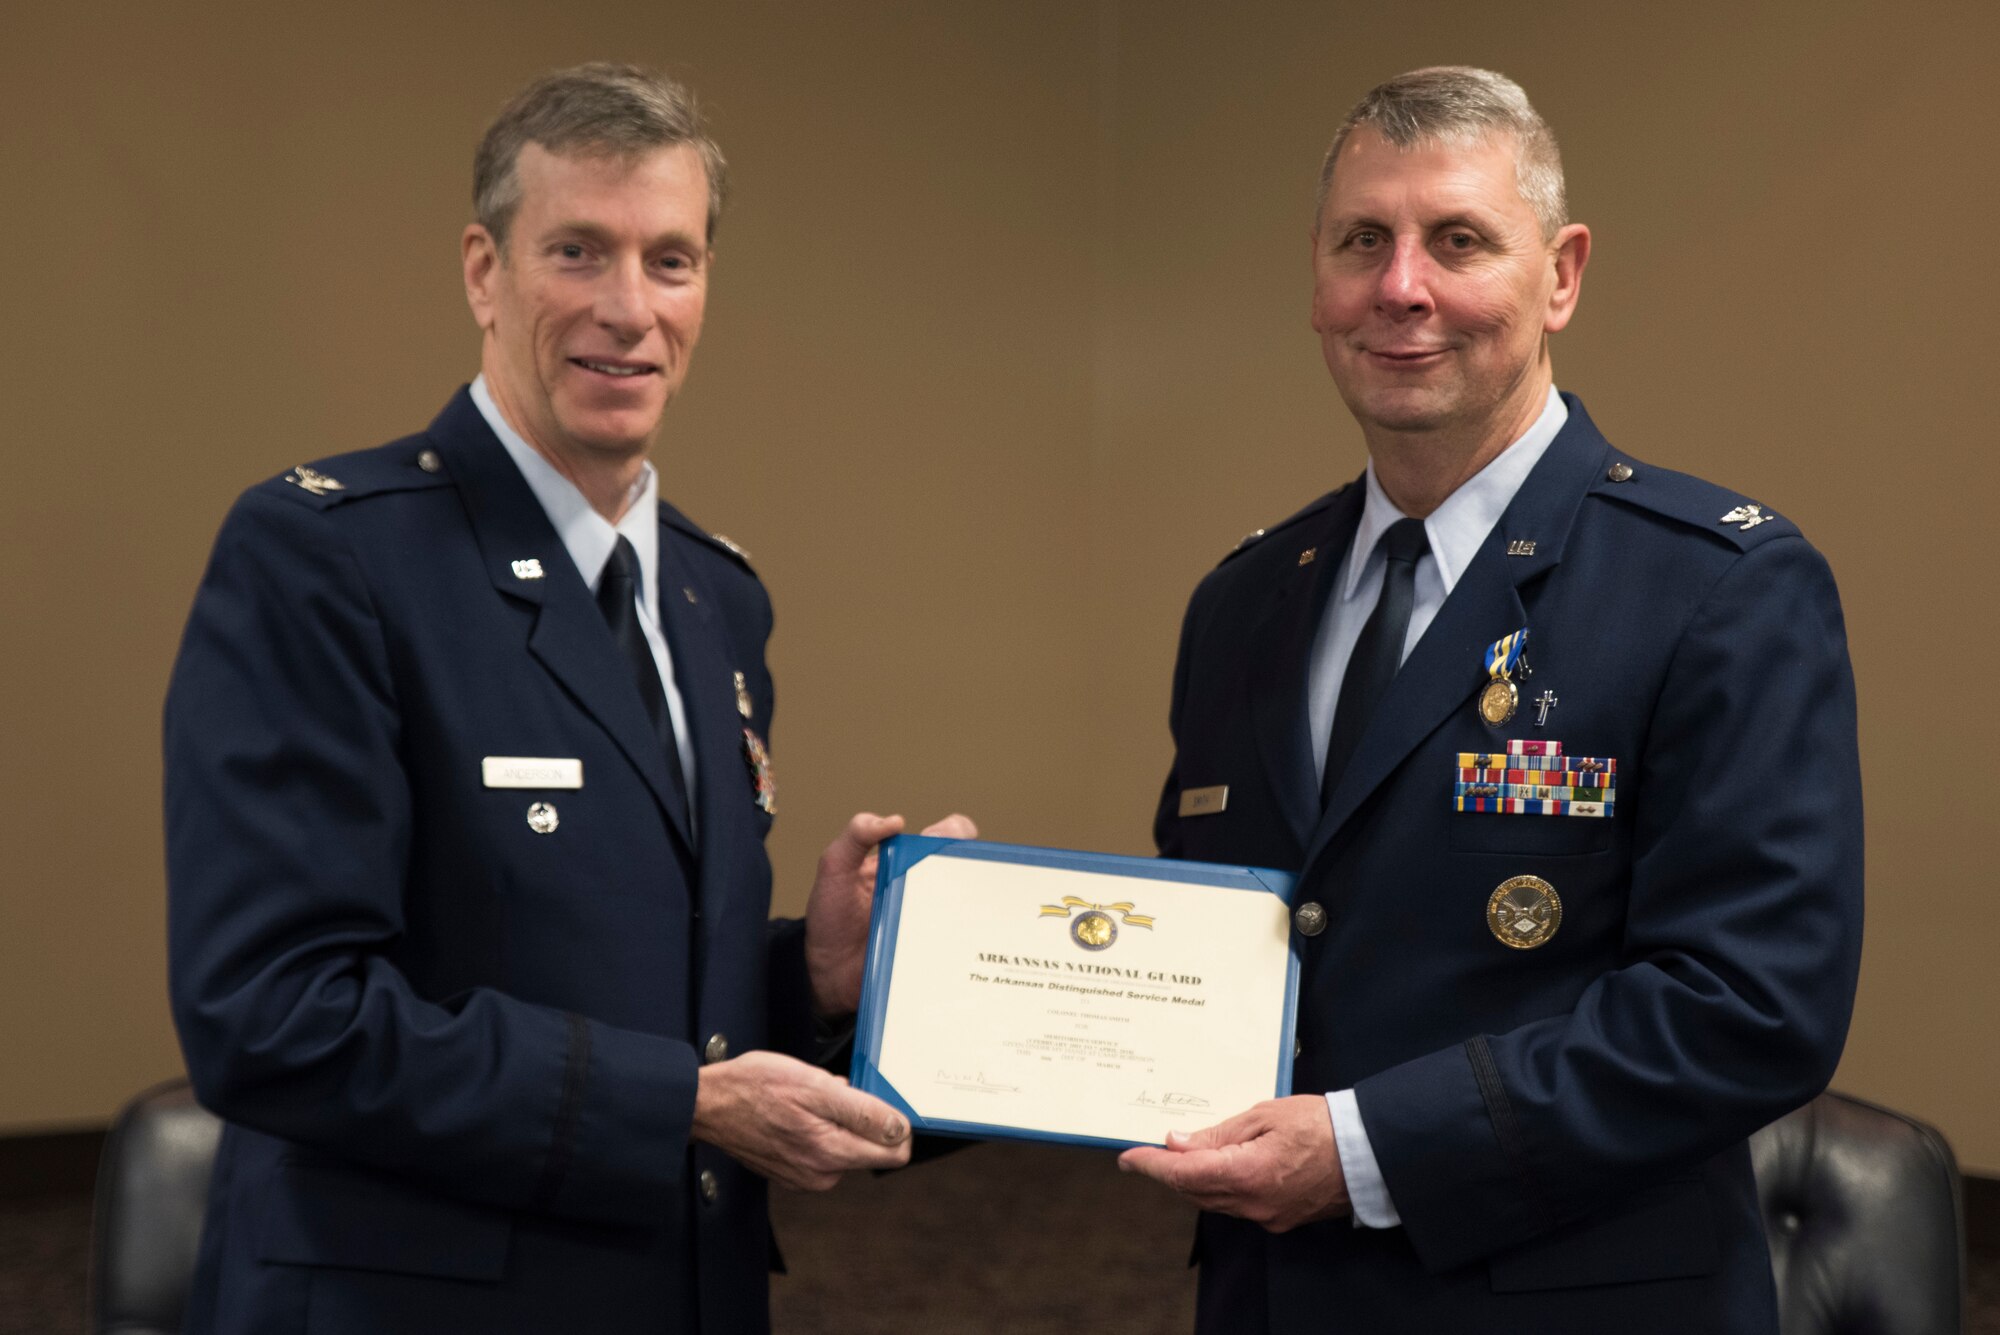 Retired Col. Mark W. Anderson, Former Commander 188th Wing, presents Col. Thomas Smith, Joint Force Headquarters Command Chaplain, with the Arkansas Distinguish Service Medal at Fort Smith, AR., Apr. 07, 2018. (U.S. Air National Guard photo by Tech. Sgt. Daniel Condit)